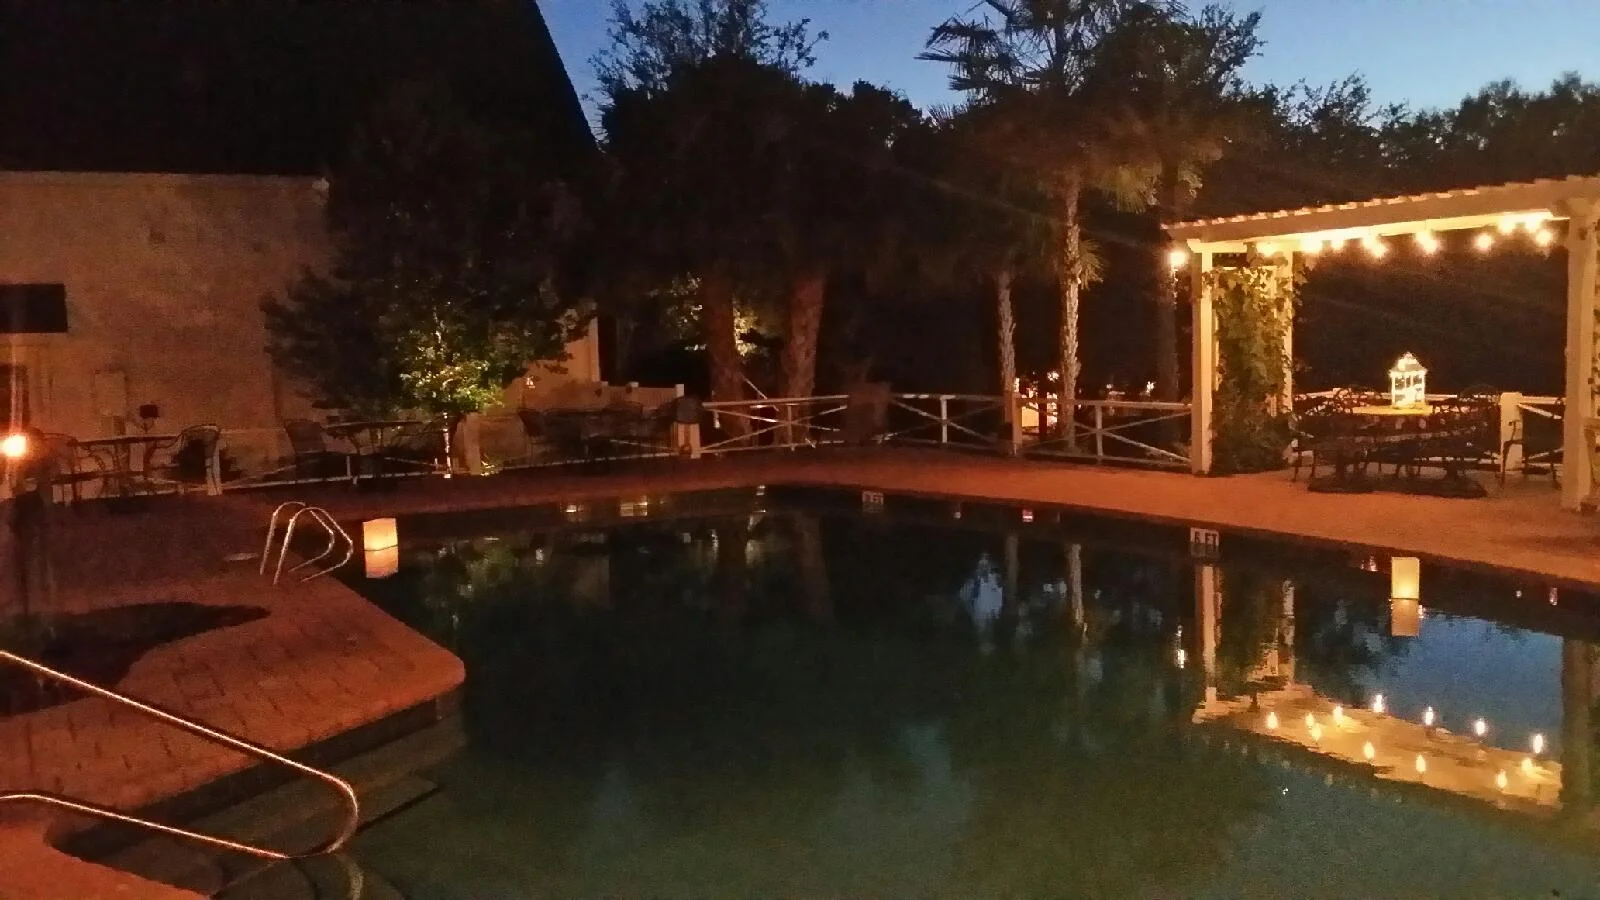 Patio and Pool area at night